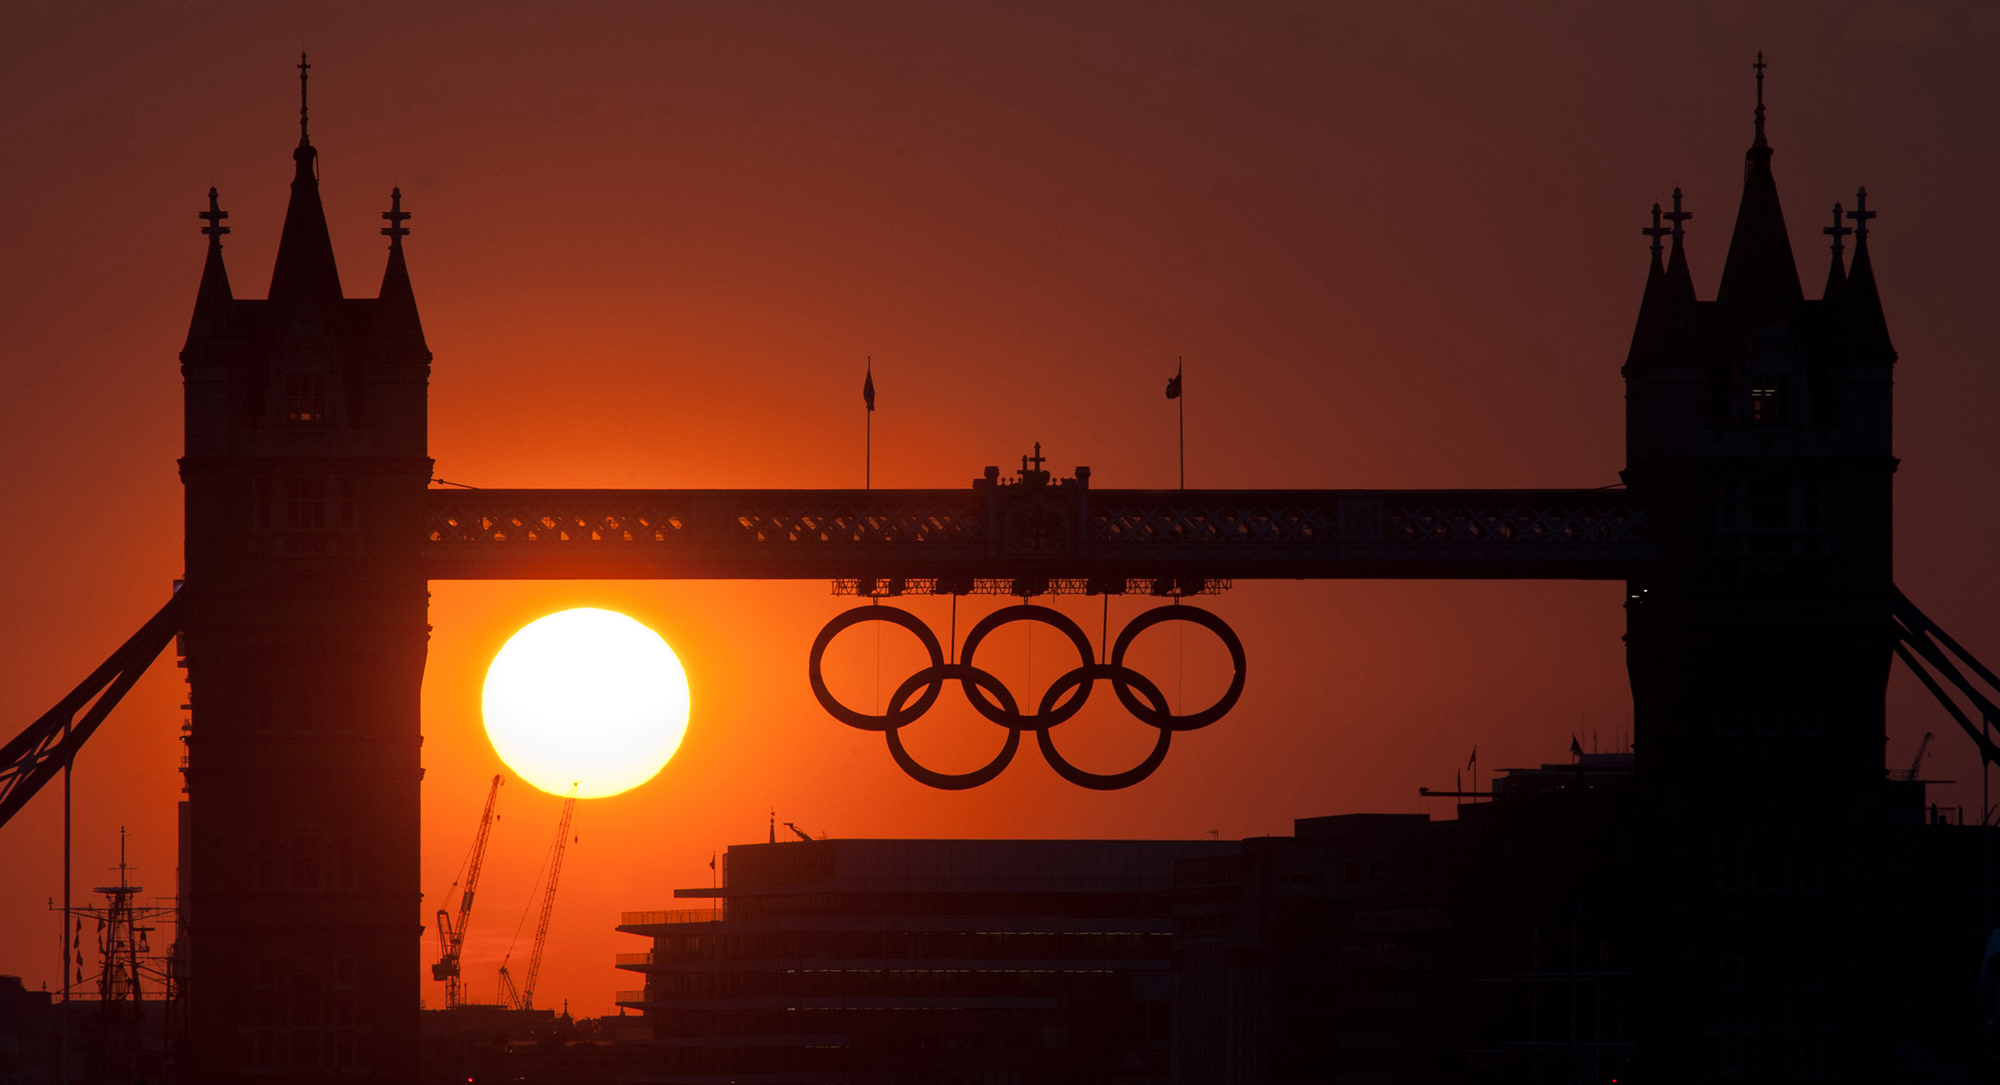 The sun sets behind Tower Bridge and the